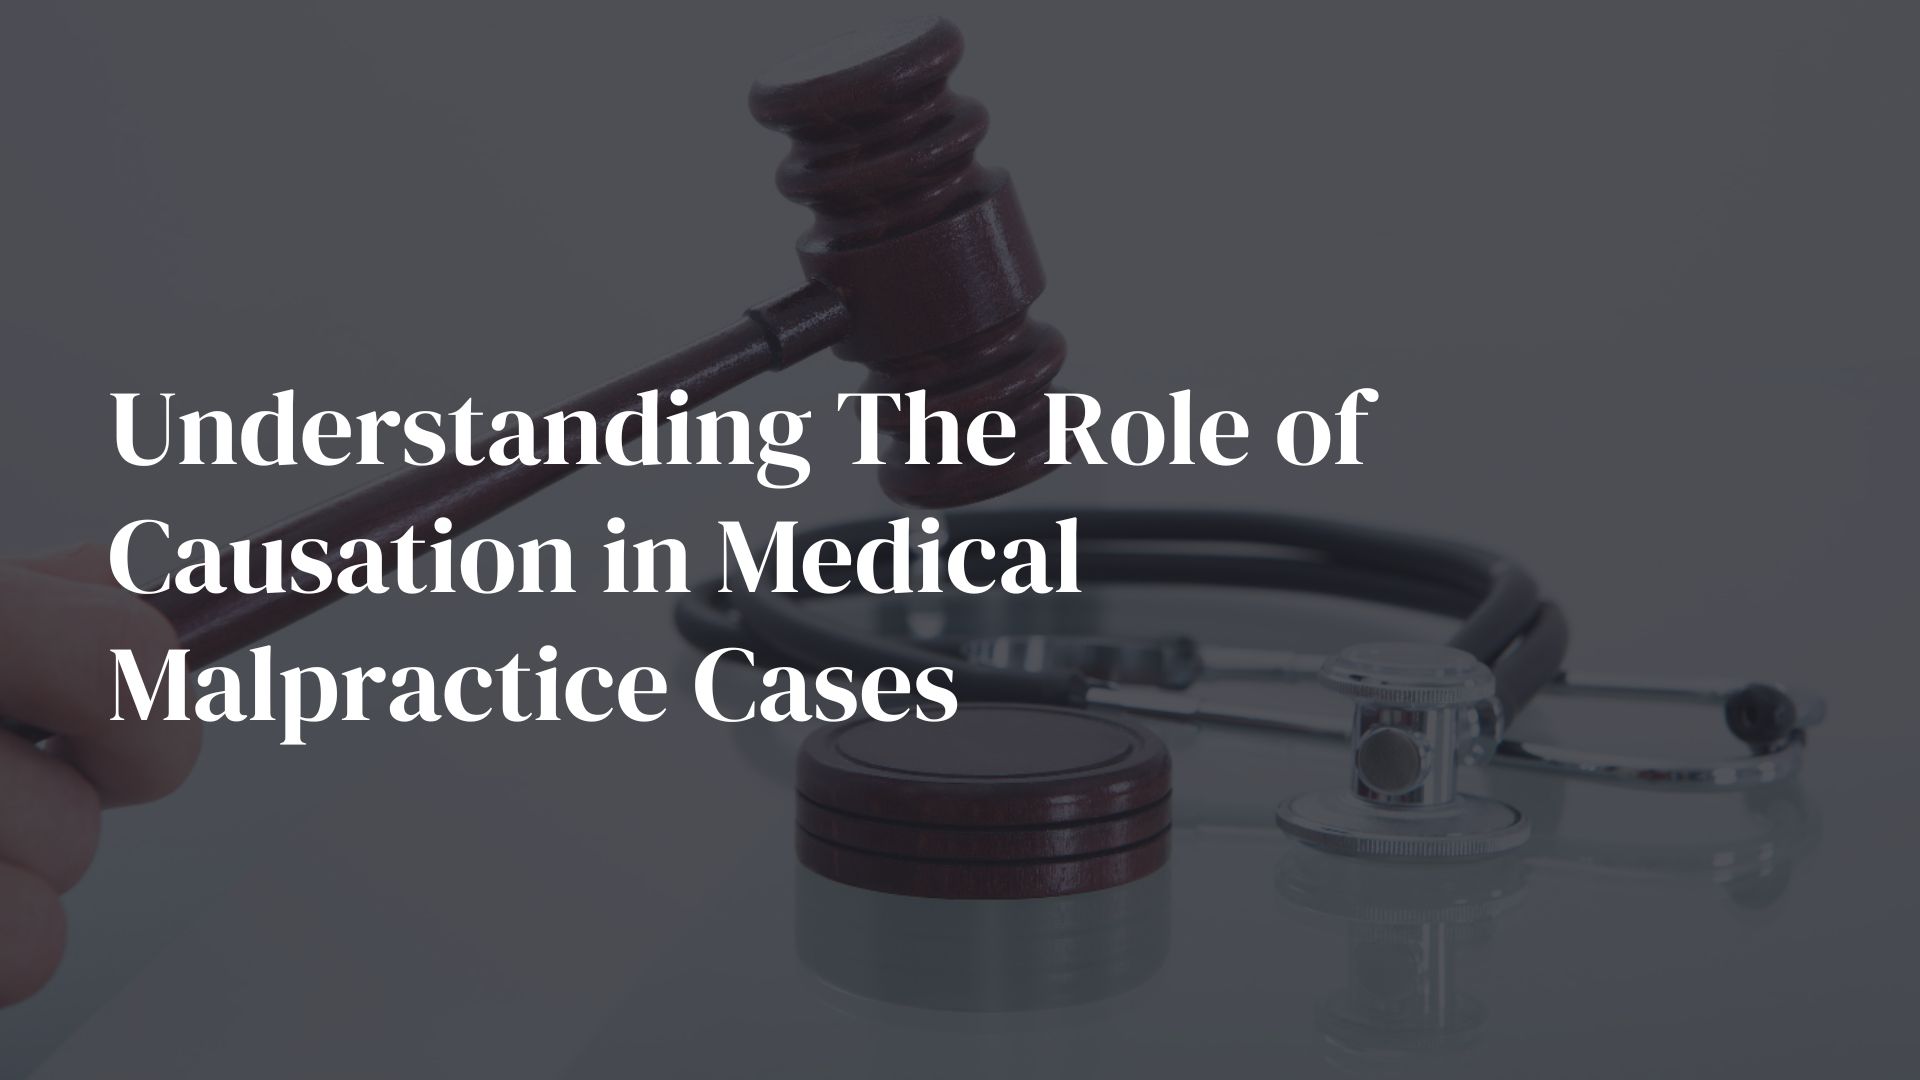 Understanding The Role of Causation in Medical Malpractice Cases